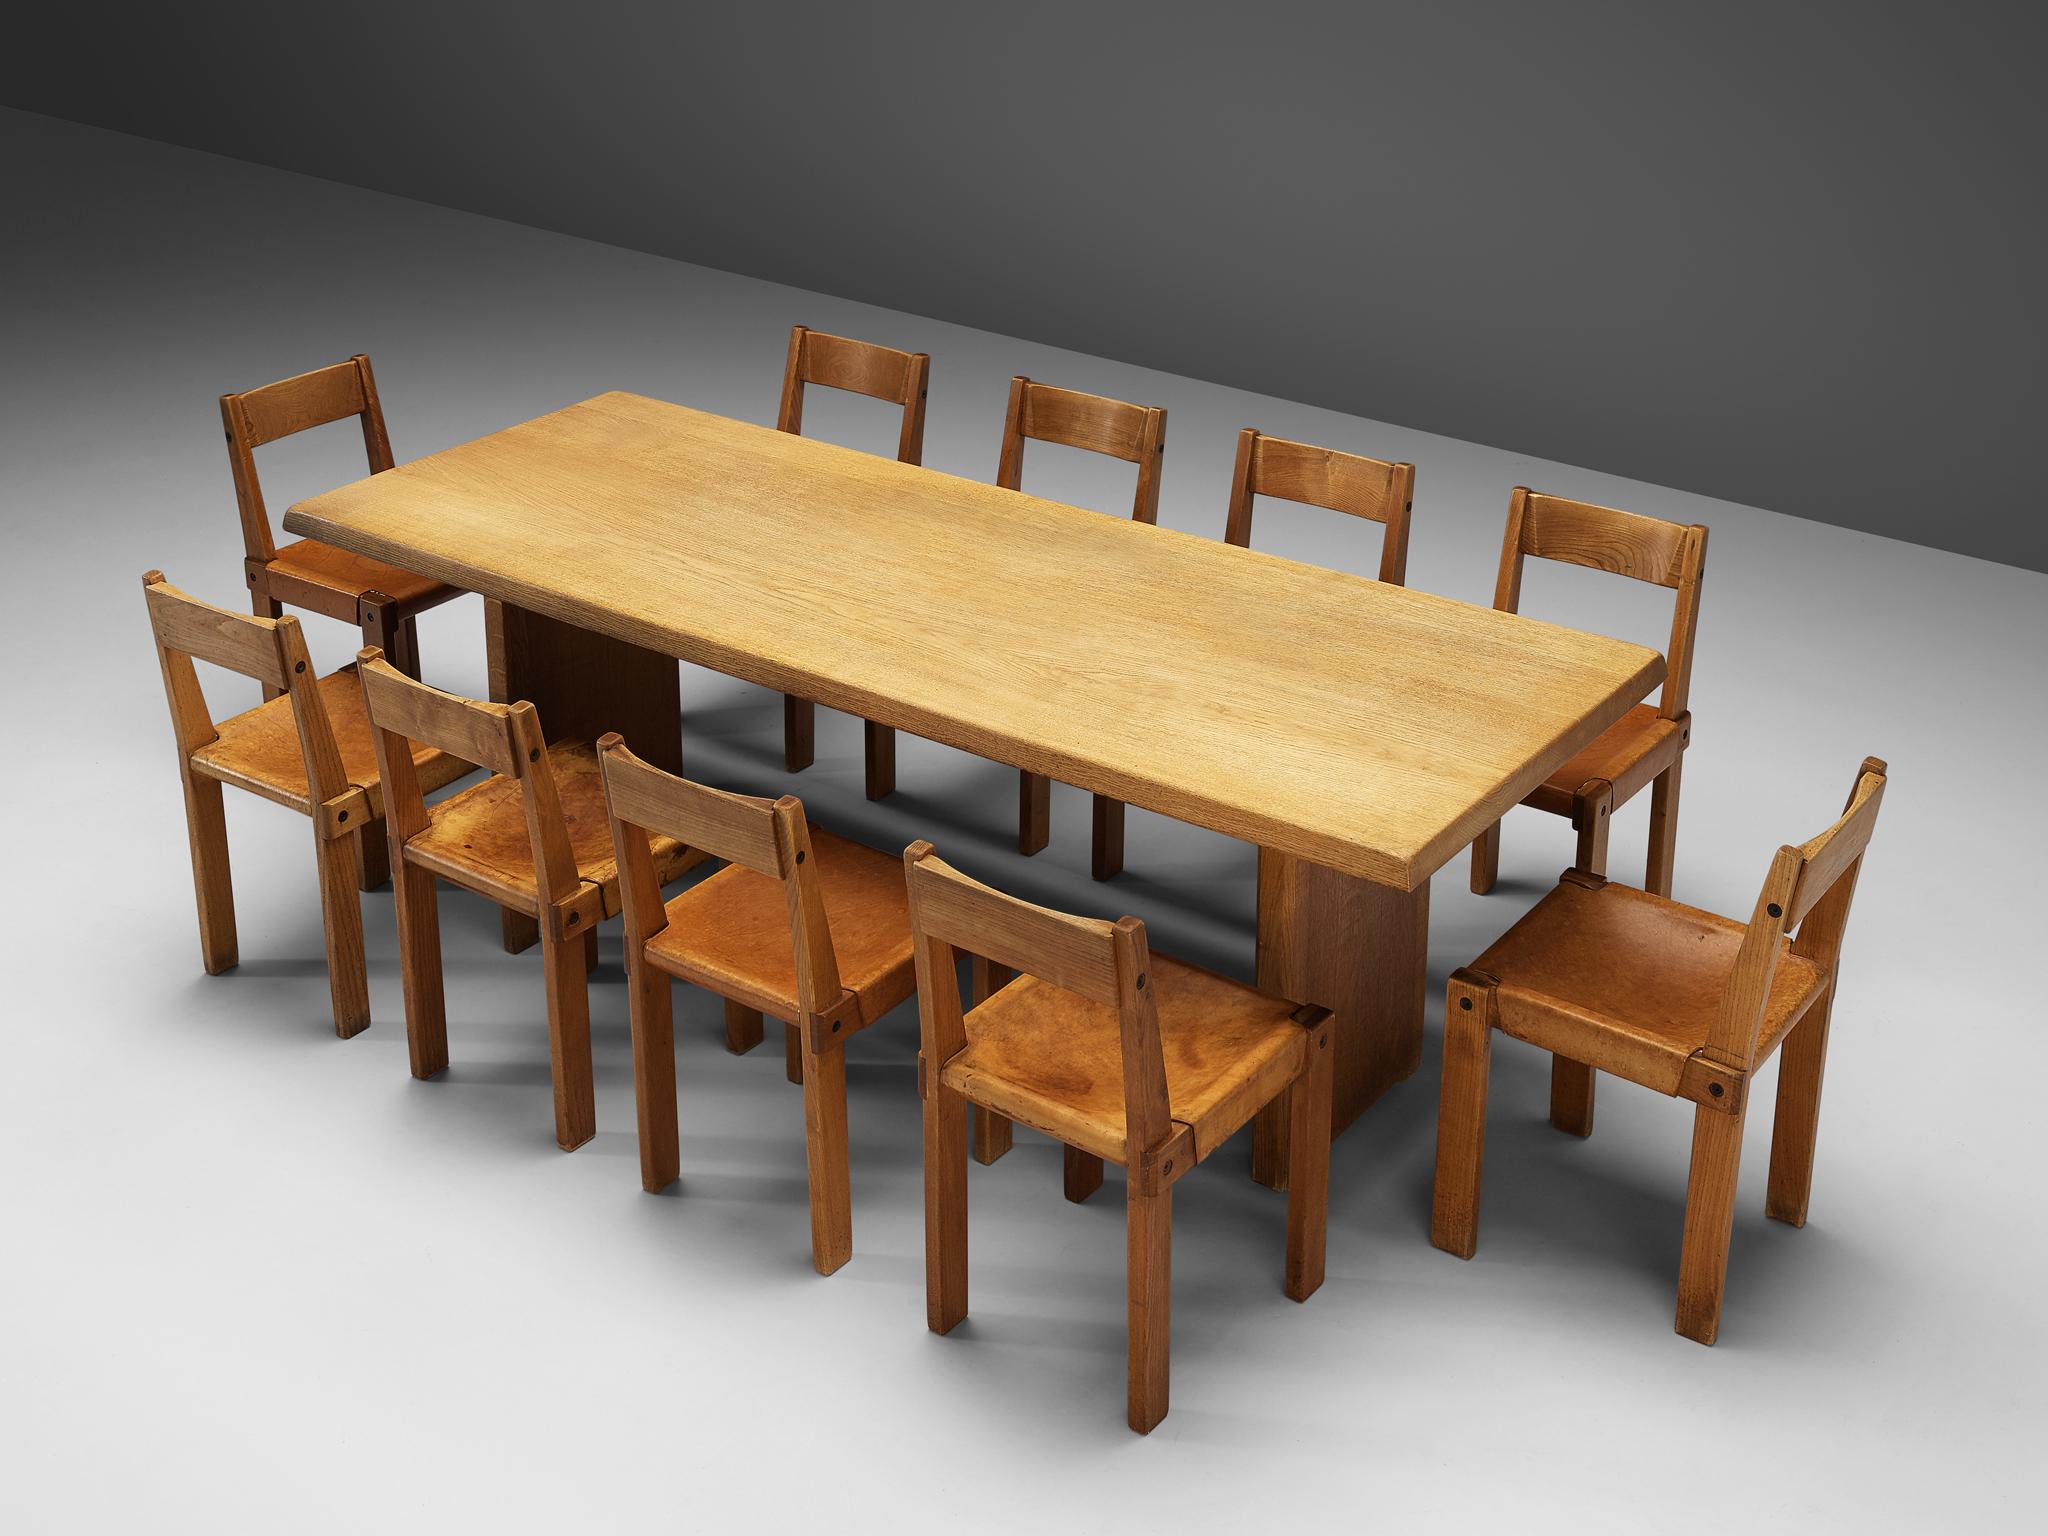 Pierre Chapo, set of ten dining chairs, model S24, elm and leather, France, circa 1966
Pierre Chapo, dining table model T14D, oak, France, design 1960s, production 1970s.

A set of ten chairs in solid elmwood with saddle leather seating and back.